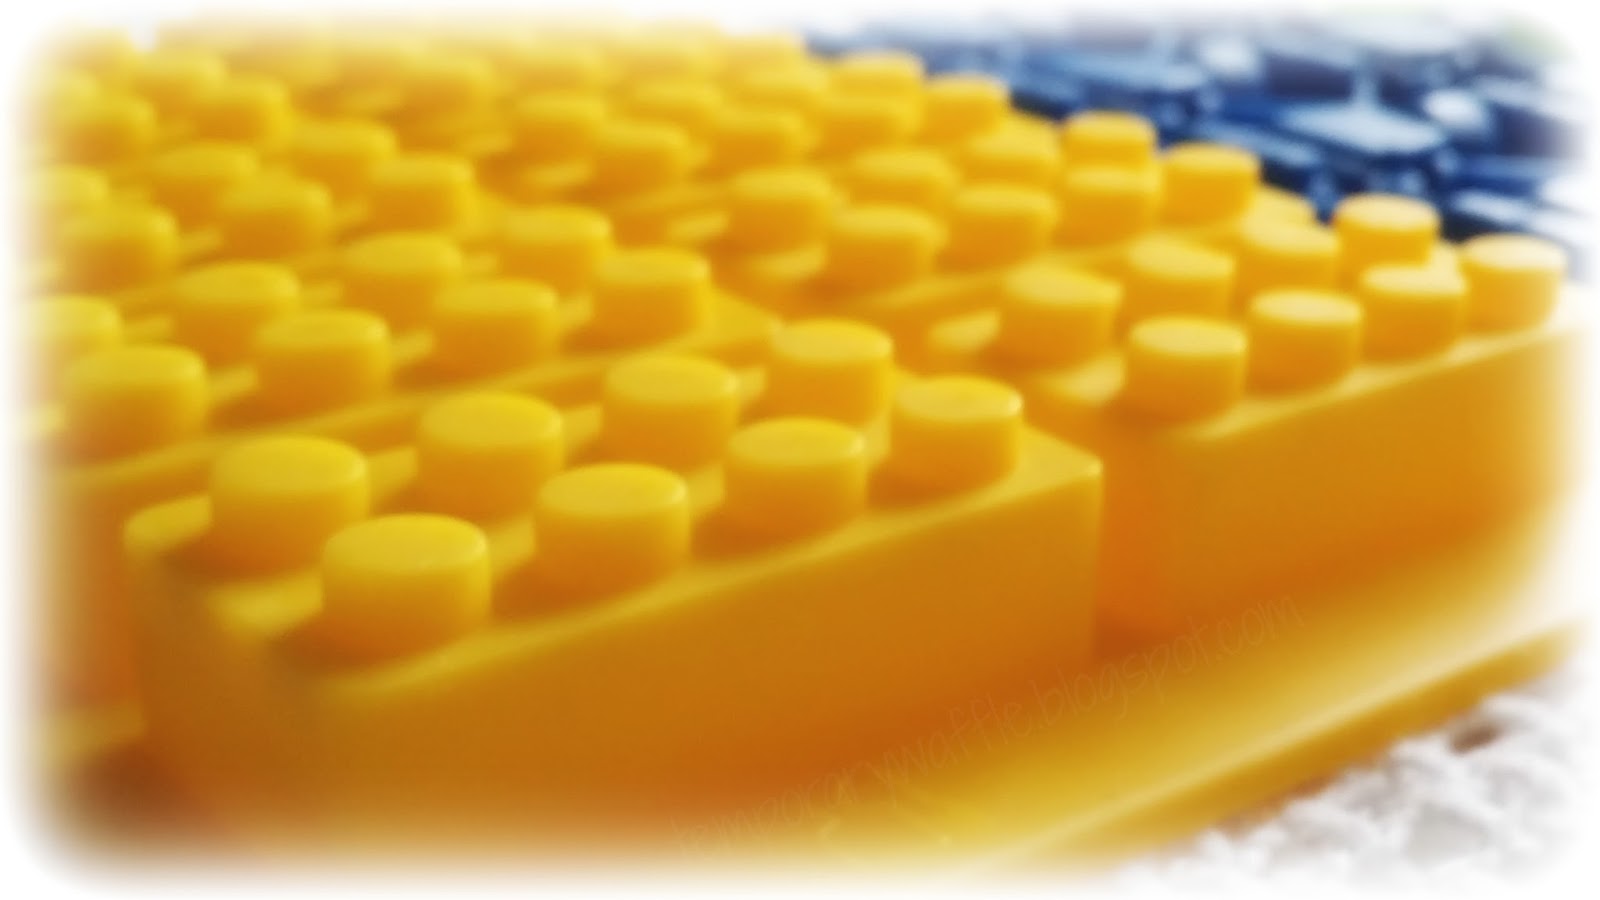 Temporary Waffle: Ohuhu Lego Silicone Mold For Crafts, Candy, And More!